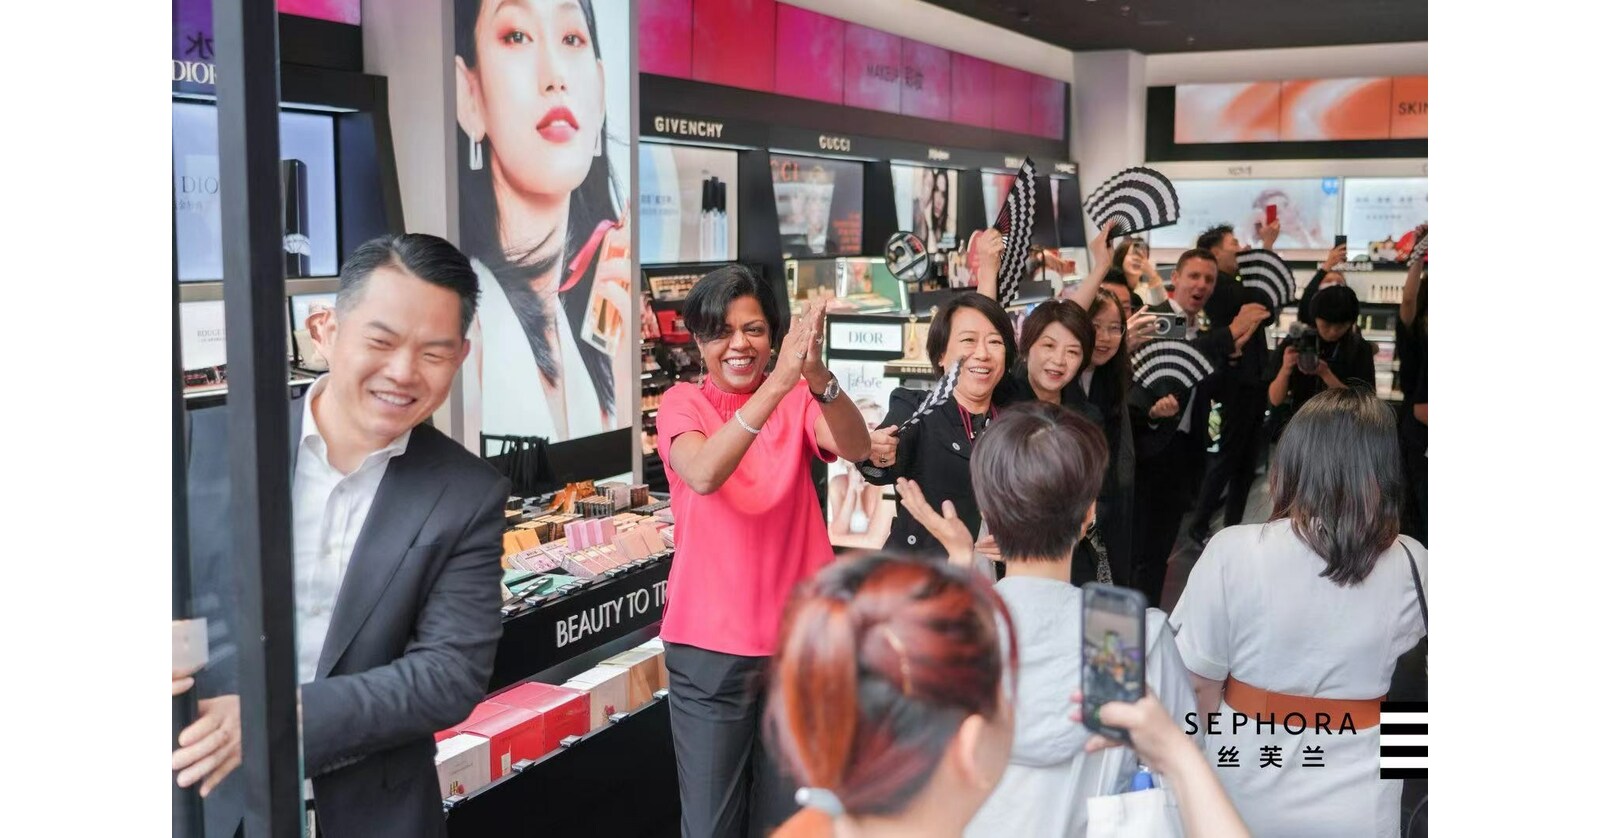 To Reach €20 Billion in Sales, Sephora Weighs China Overhaul